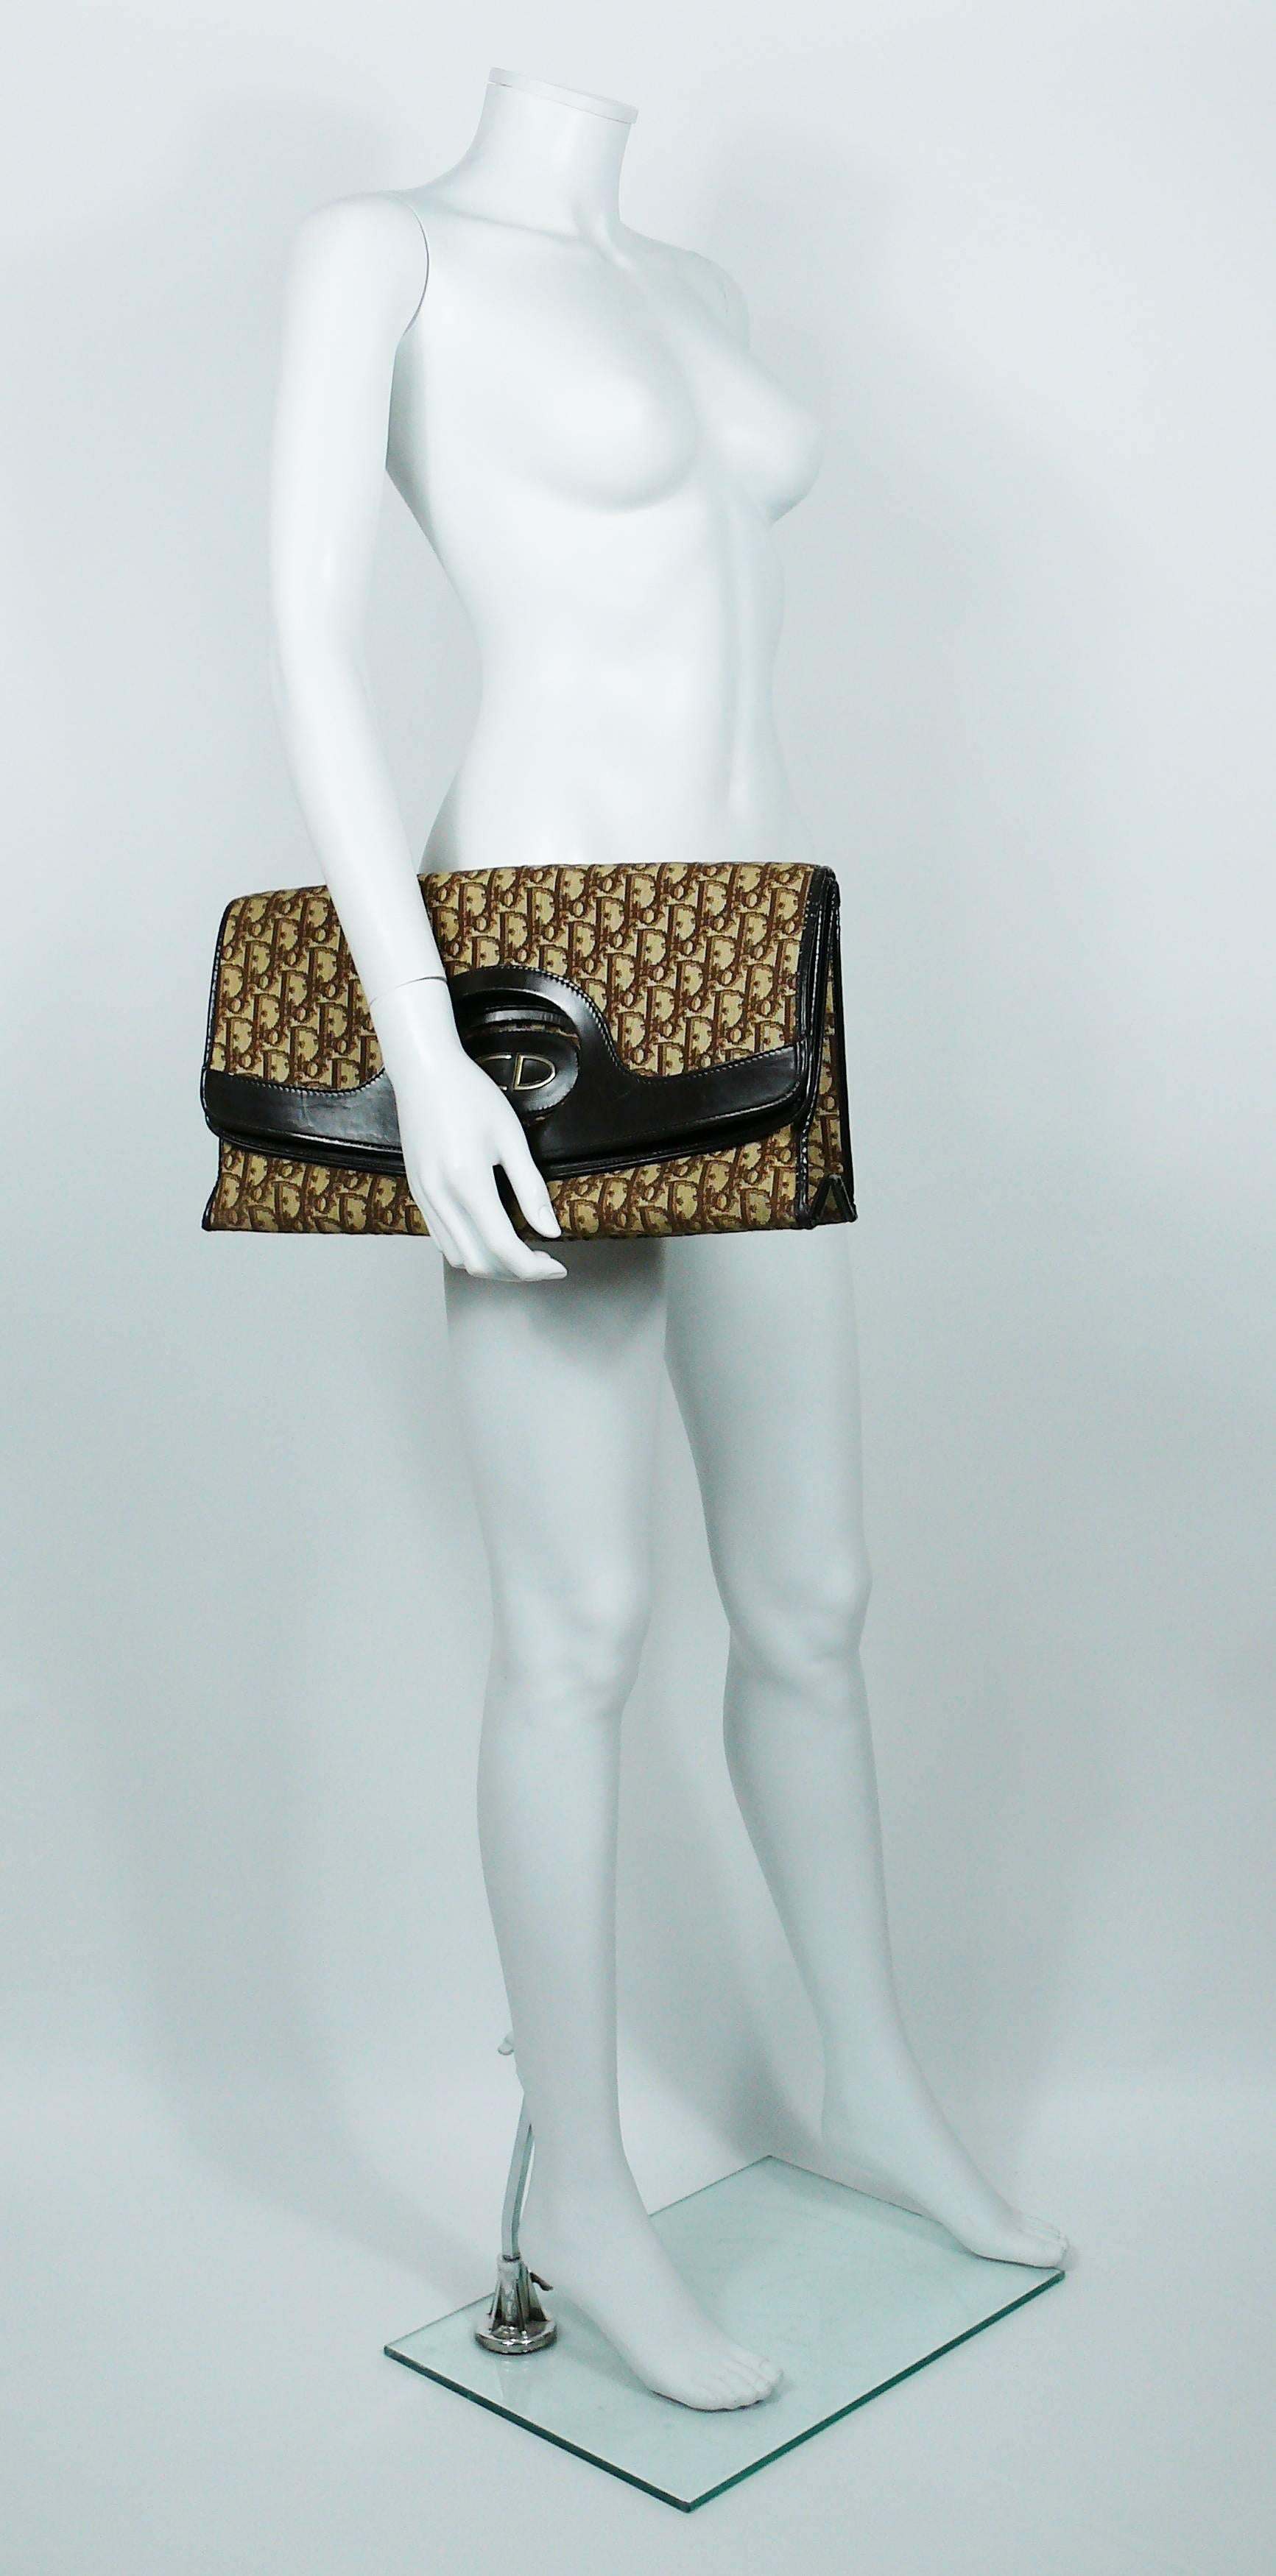 CHRISTIAN DIOR iconic vintage bag featuring brown monogram canvas on a off-white background, brown leather and gold toned CD monogram.

This is a rare XL version and a versatile piece that may be worn as a tote or clutch.

One inner pocket.

Marked